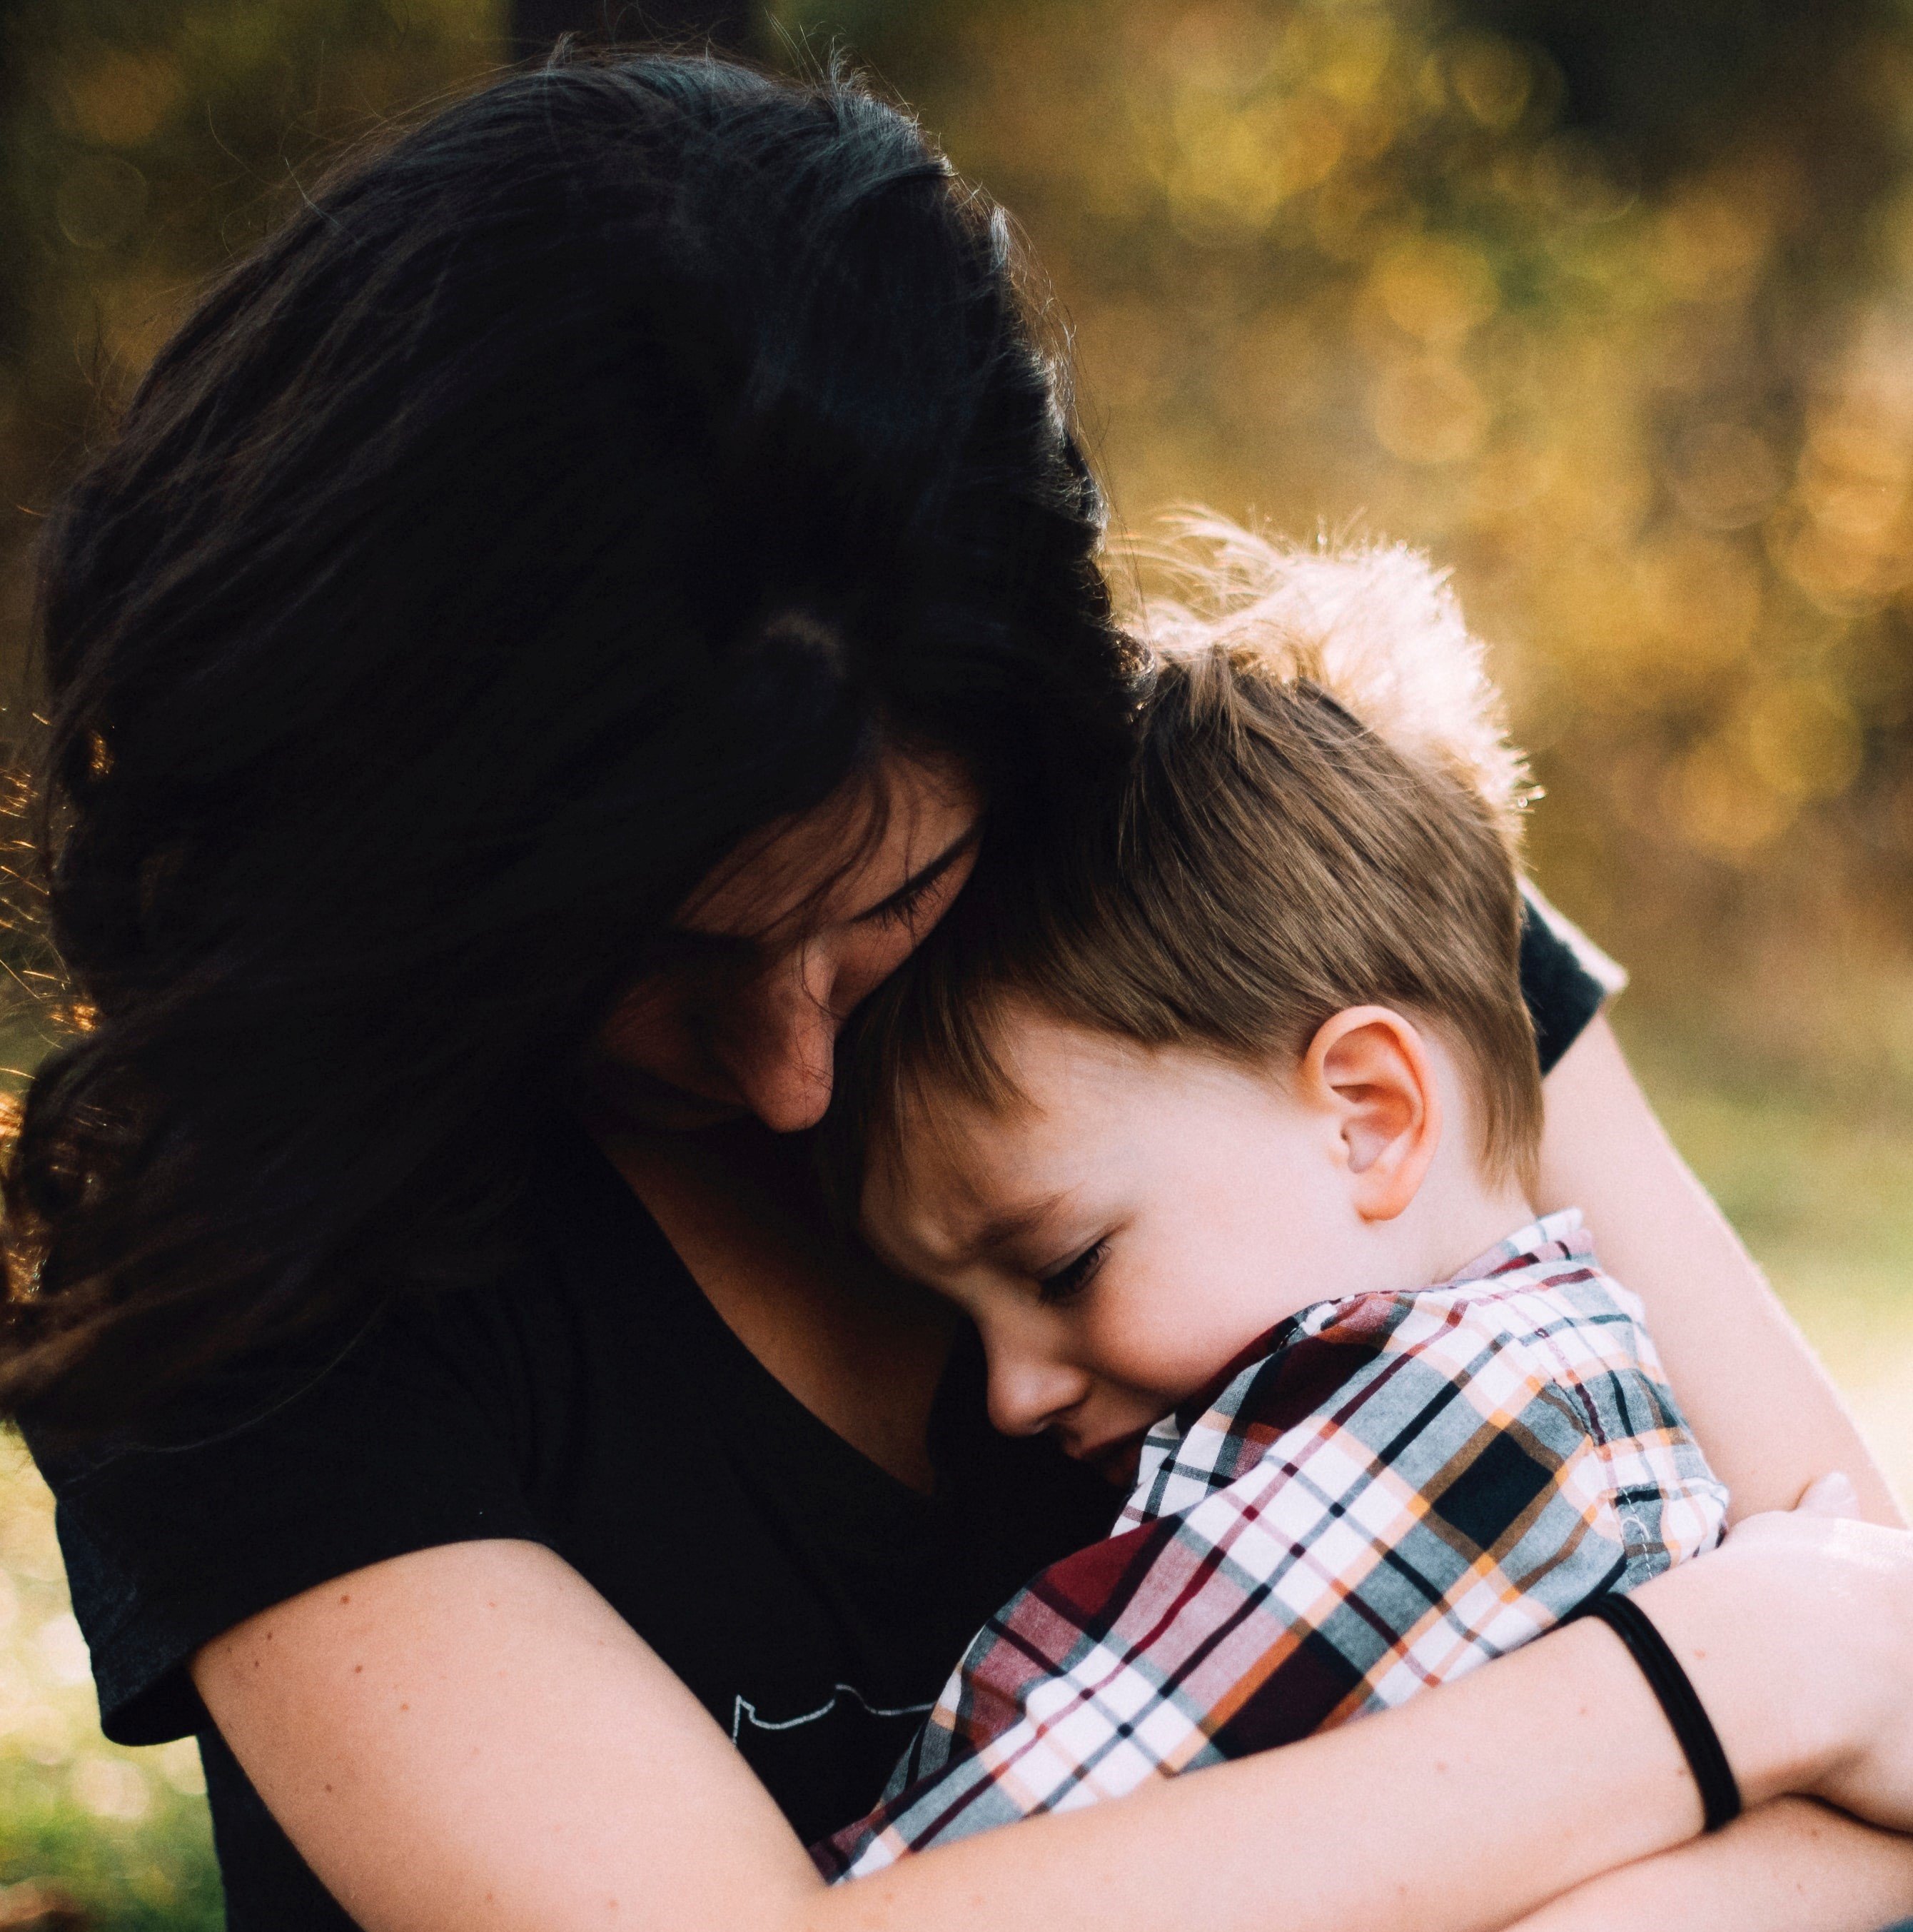 Daniel cried all the time and his mom couldn't comfort him. | Source: Unsplash